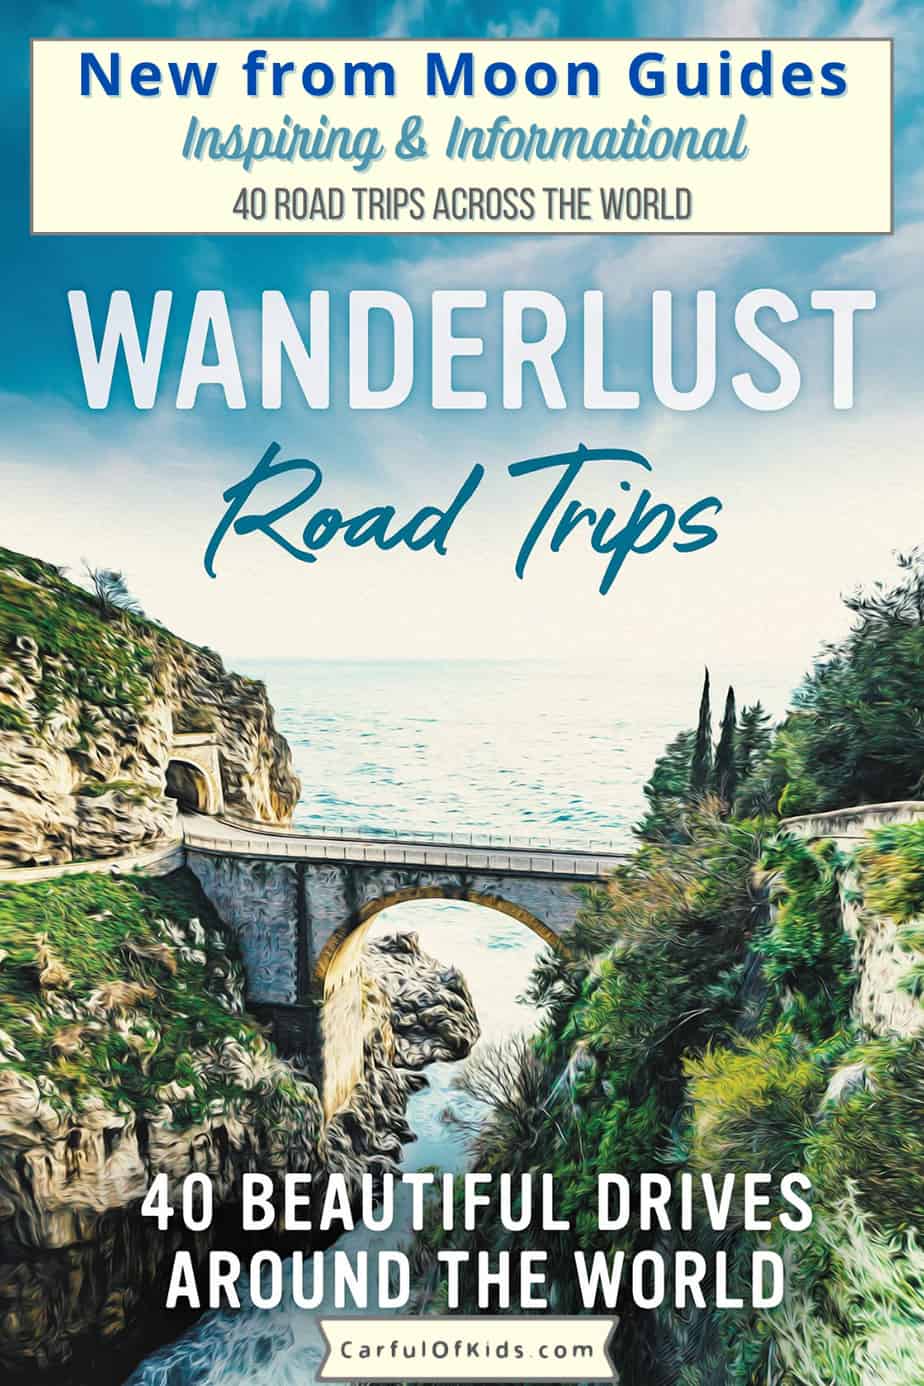 Plan your next road trip with the Wanderlust Road Trips by Moon Travel Guides sharing 40 amazing trips packed with in-the-know information along with the best excursions along the way. Road Trip Books | Top Road Trips to Take across the World #BookReview #Travel Book